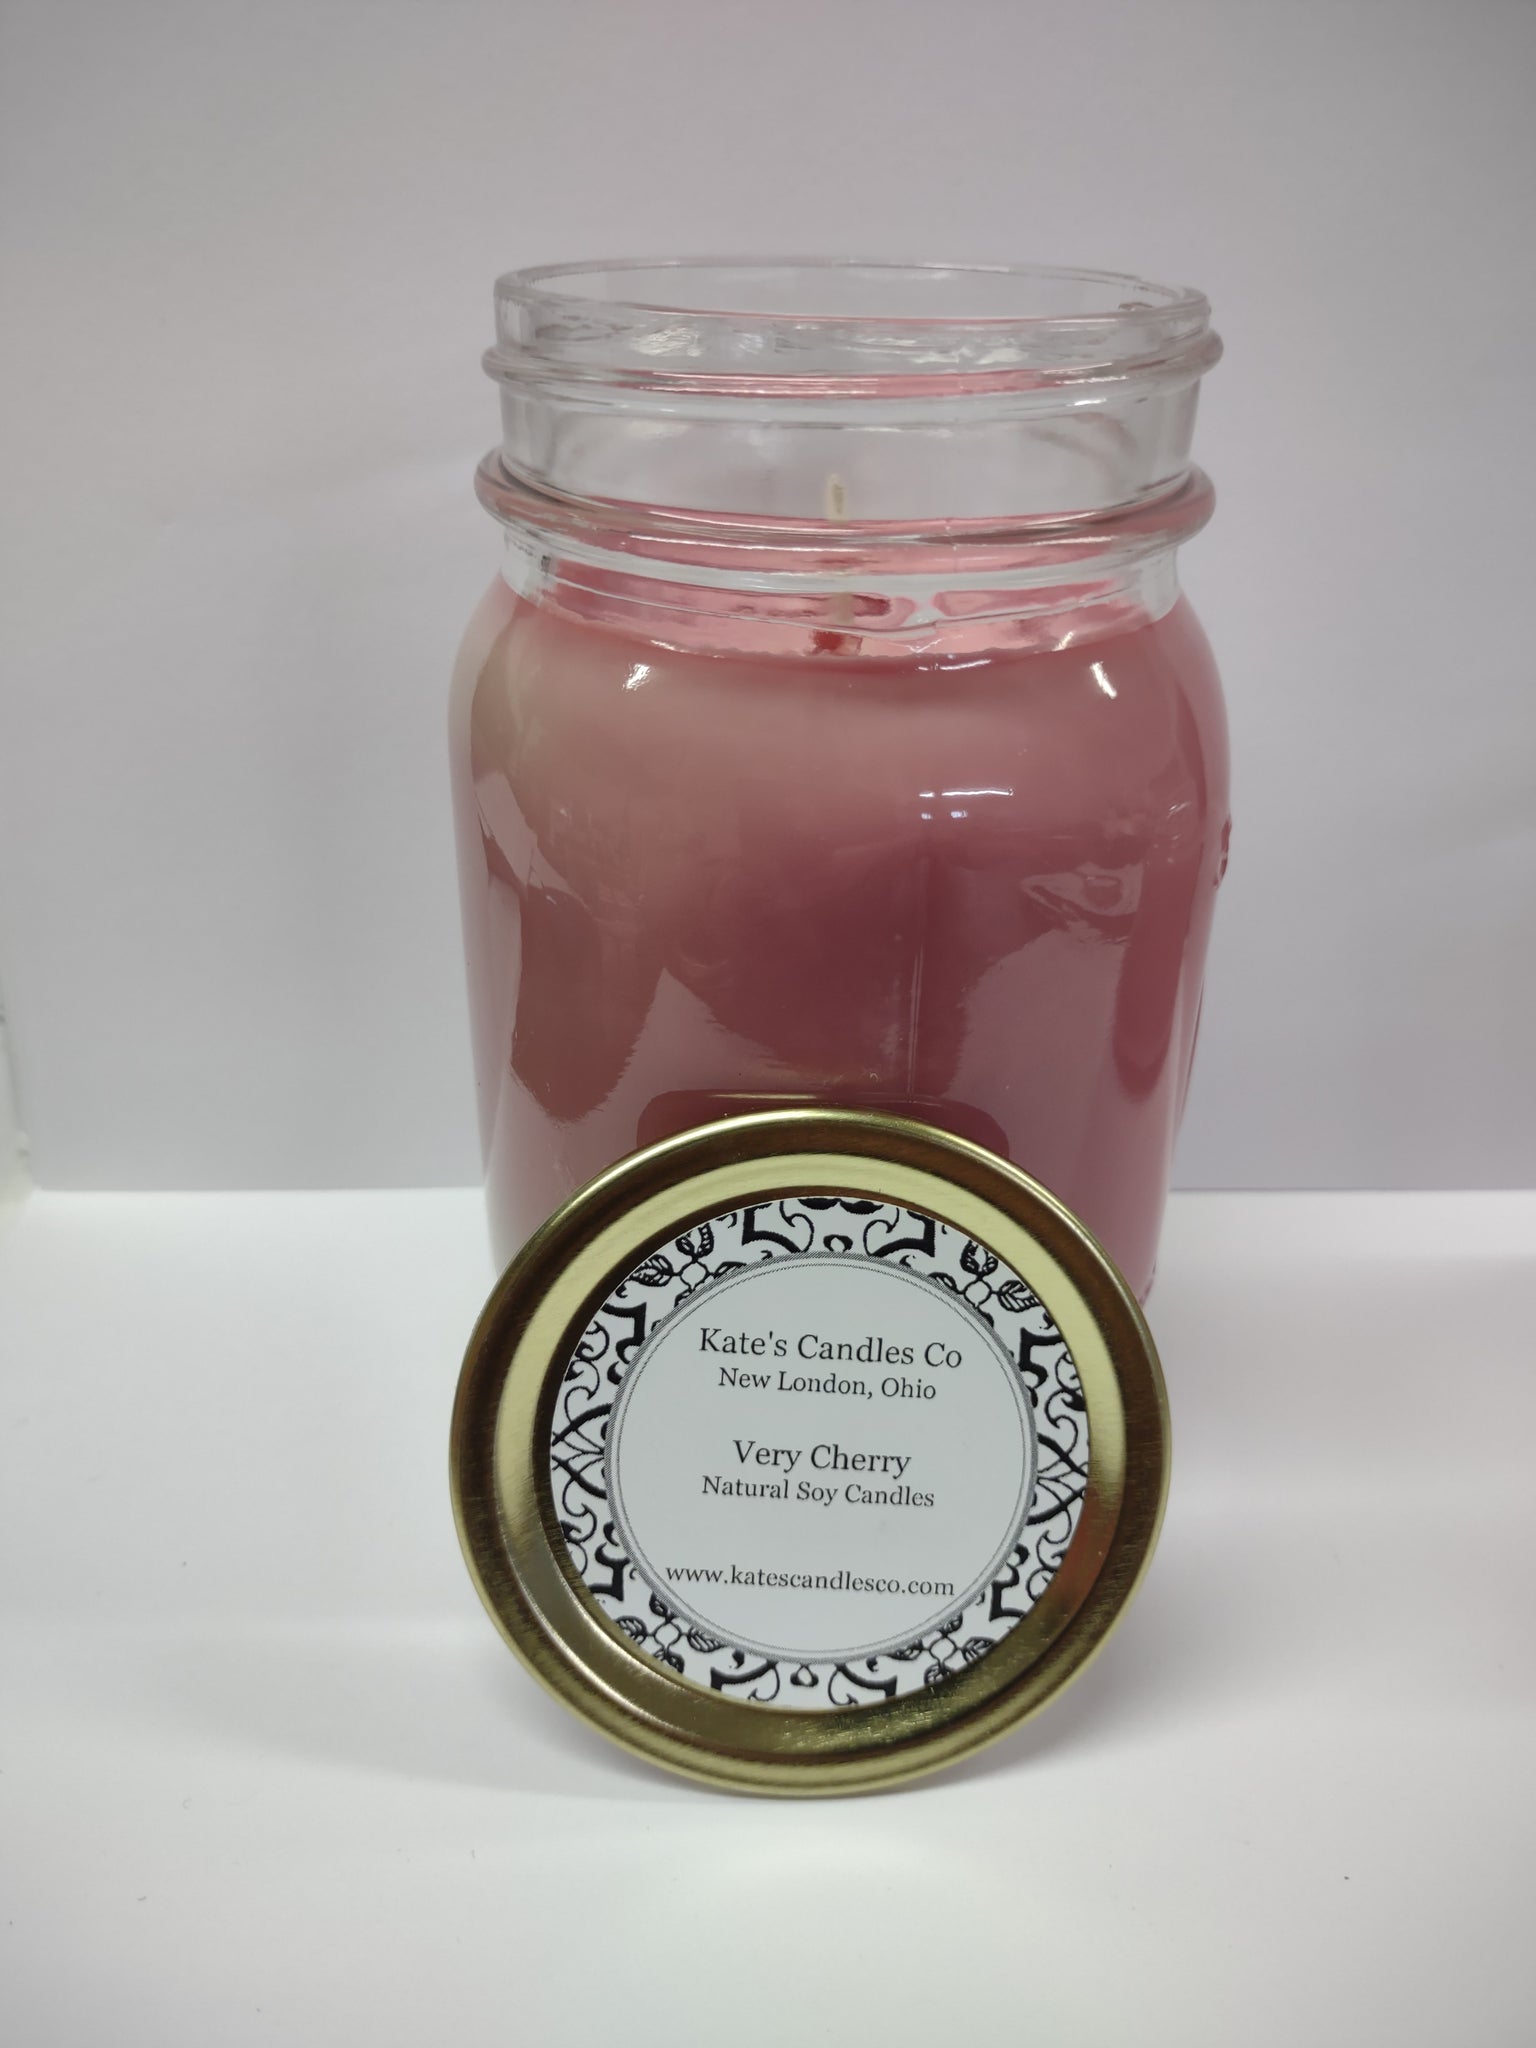 Very Cherry Soy Candles | Kate's Candles Co. Soy Candles